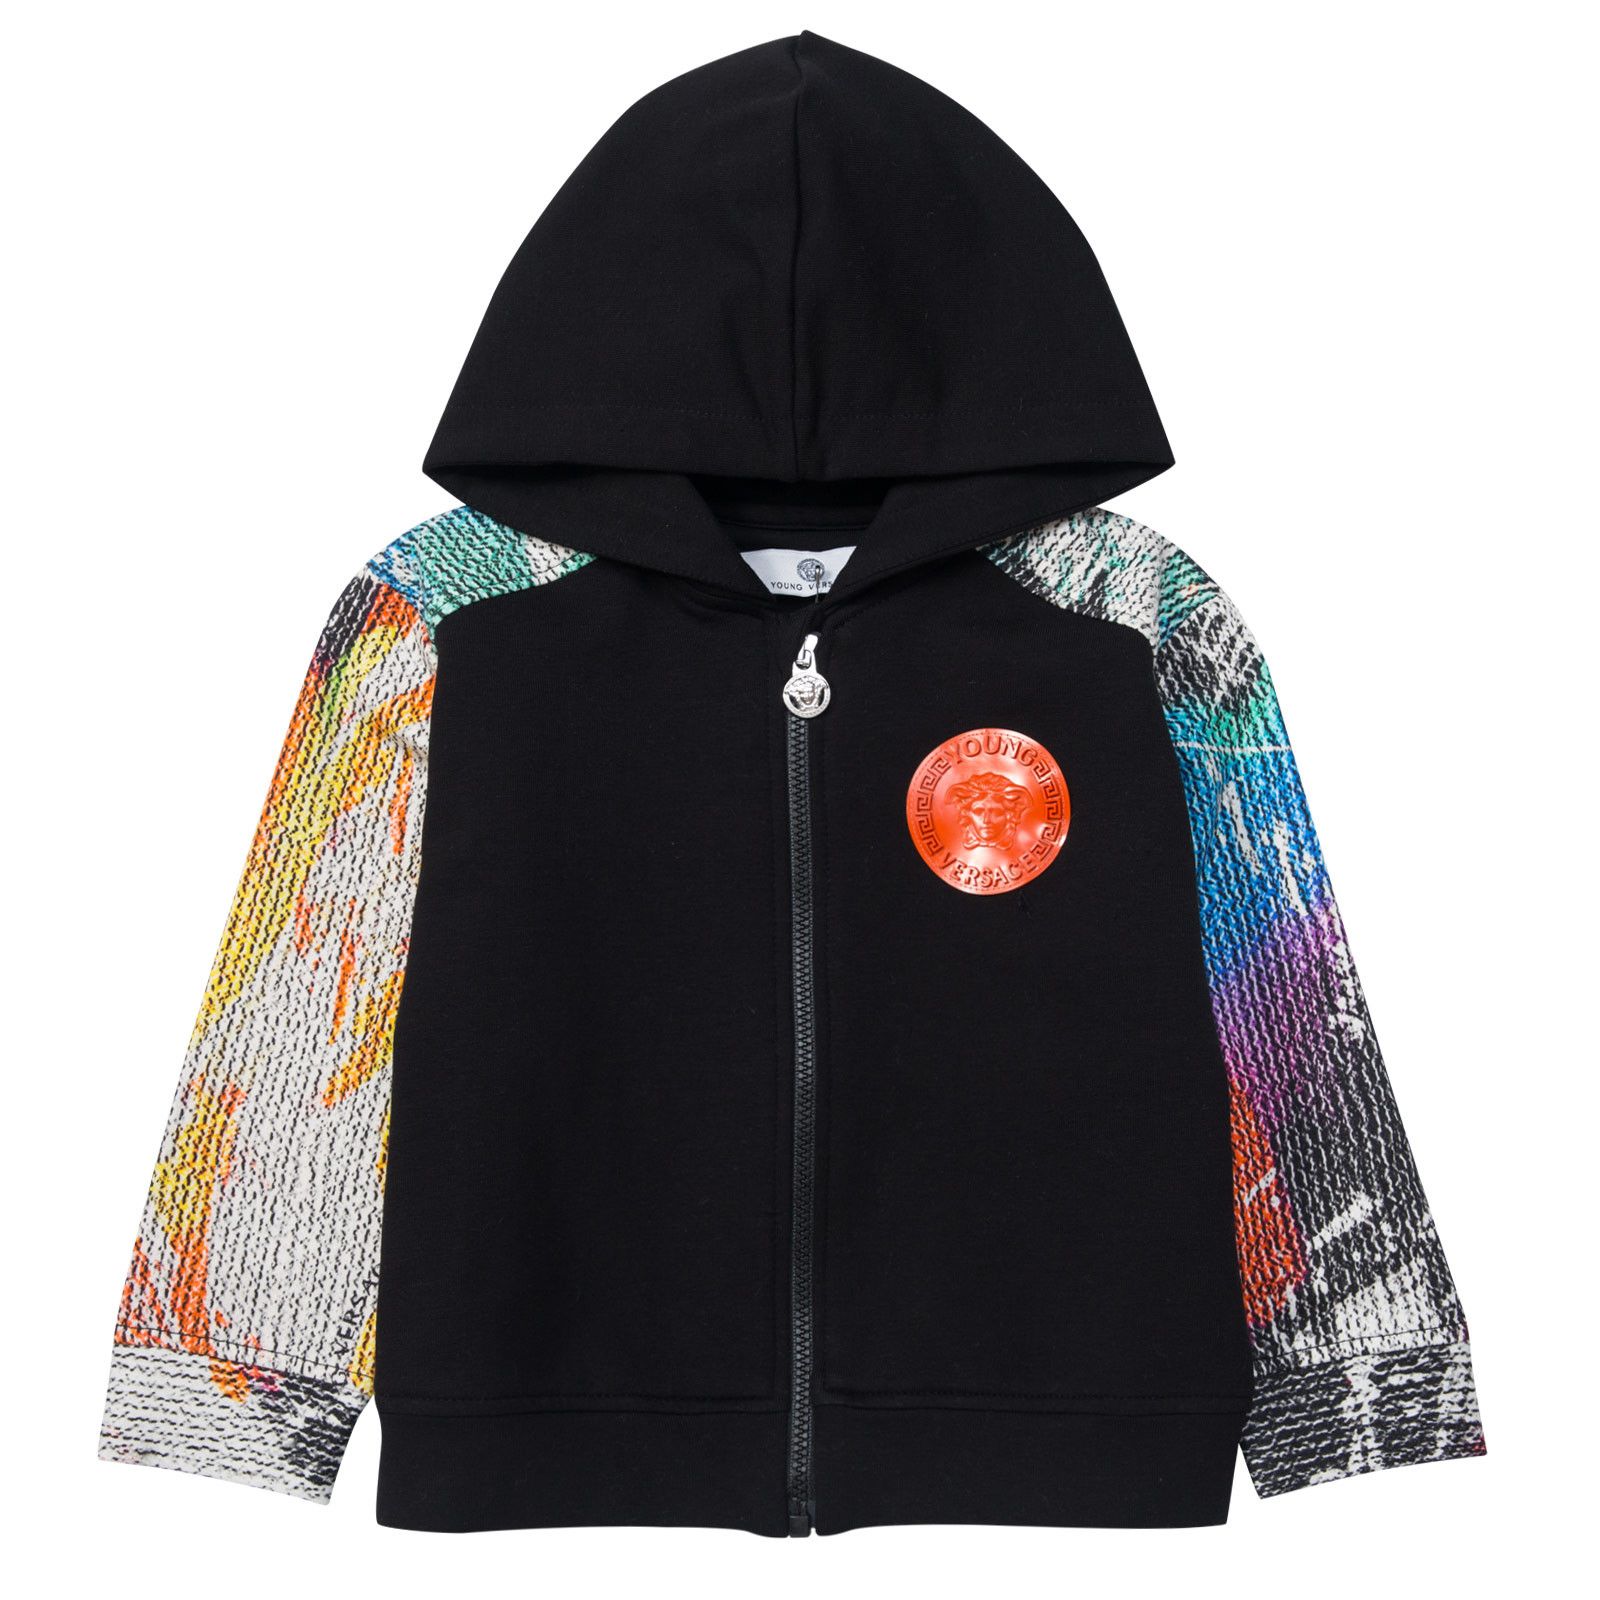 Baby Boys Black Hooded Top With Multicolor Cuffs - CÉMAROSE | Children's Fashion Store - 1